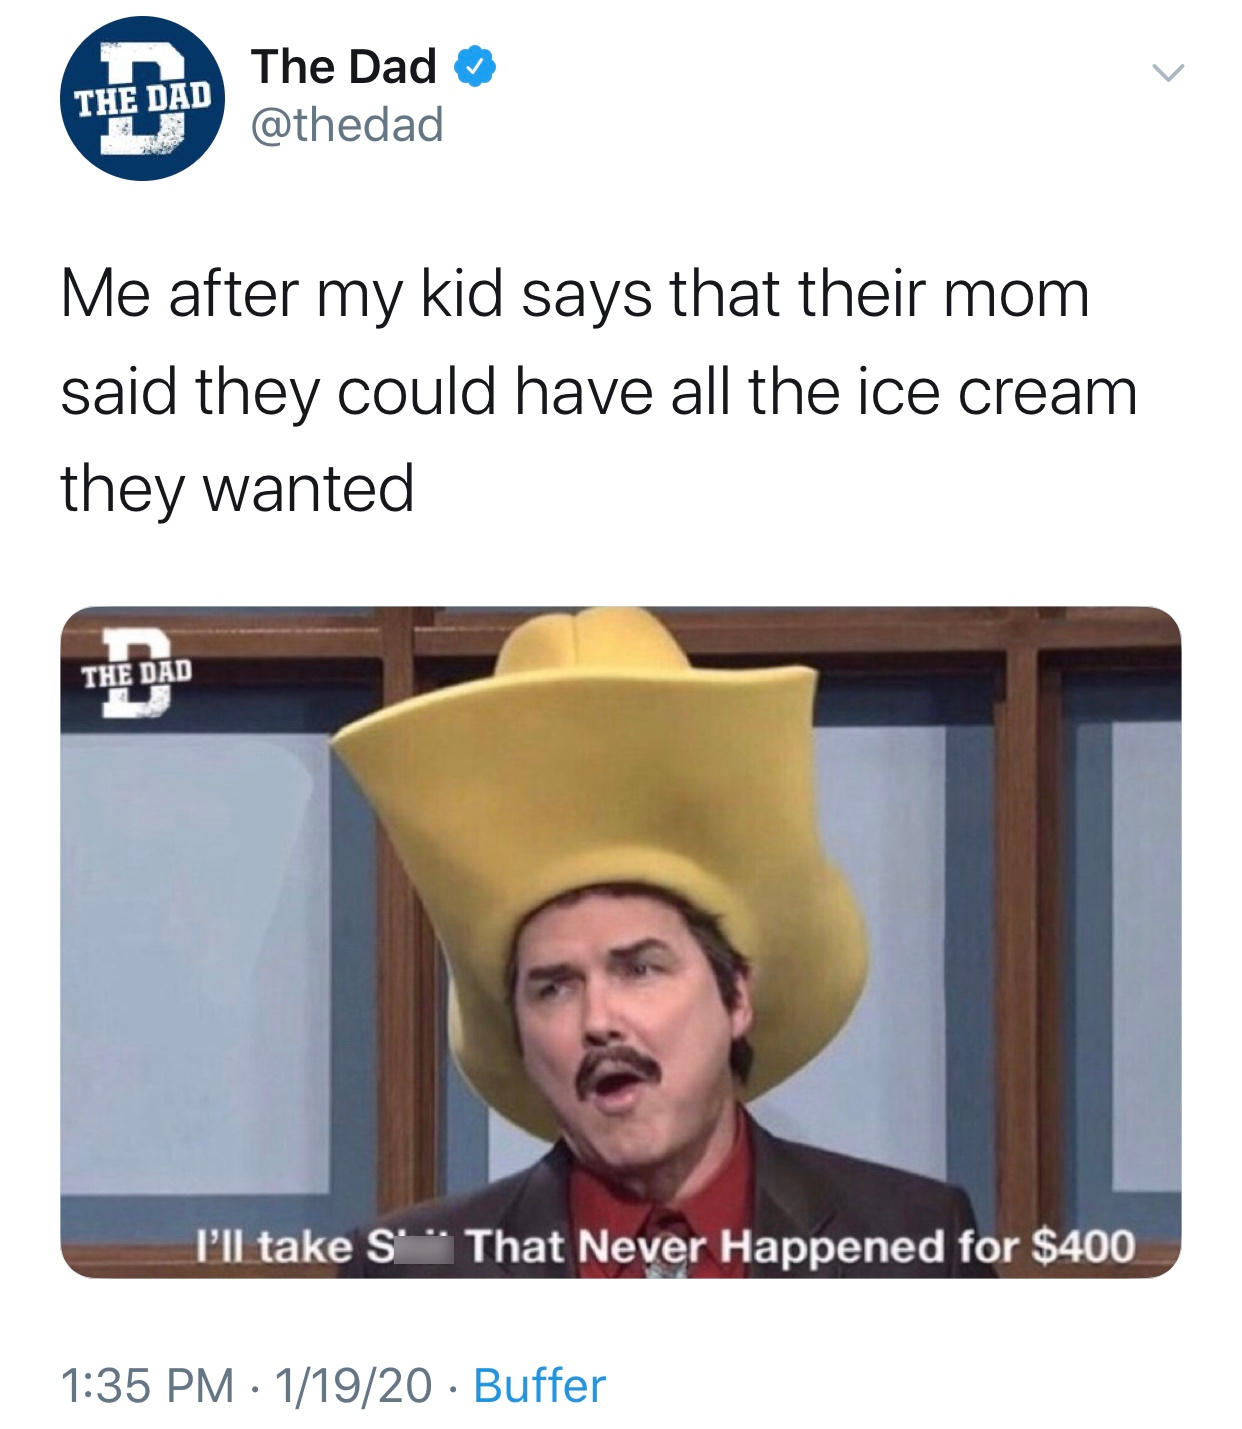 Burt Reynolds - The Dad The Dad Me after my kid says that their mom said they could have all the ice cream they wanted The Dad I'll take S That Never Happened for $400 11920 Buffer